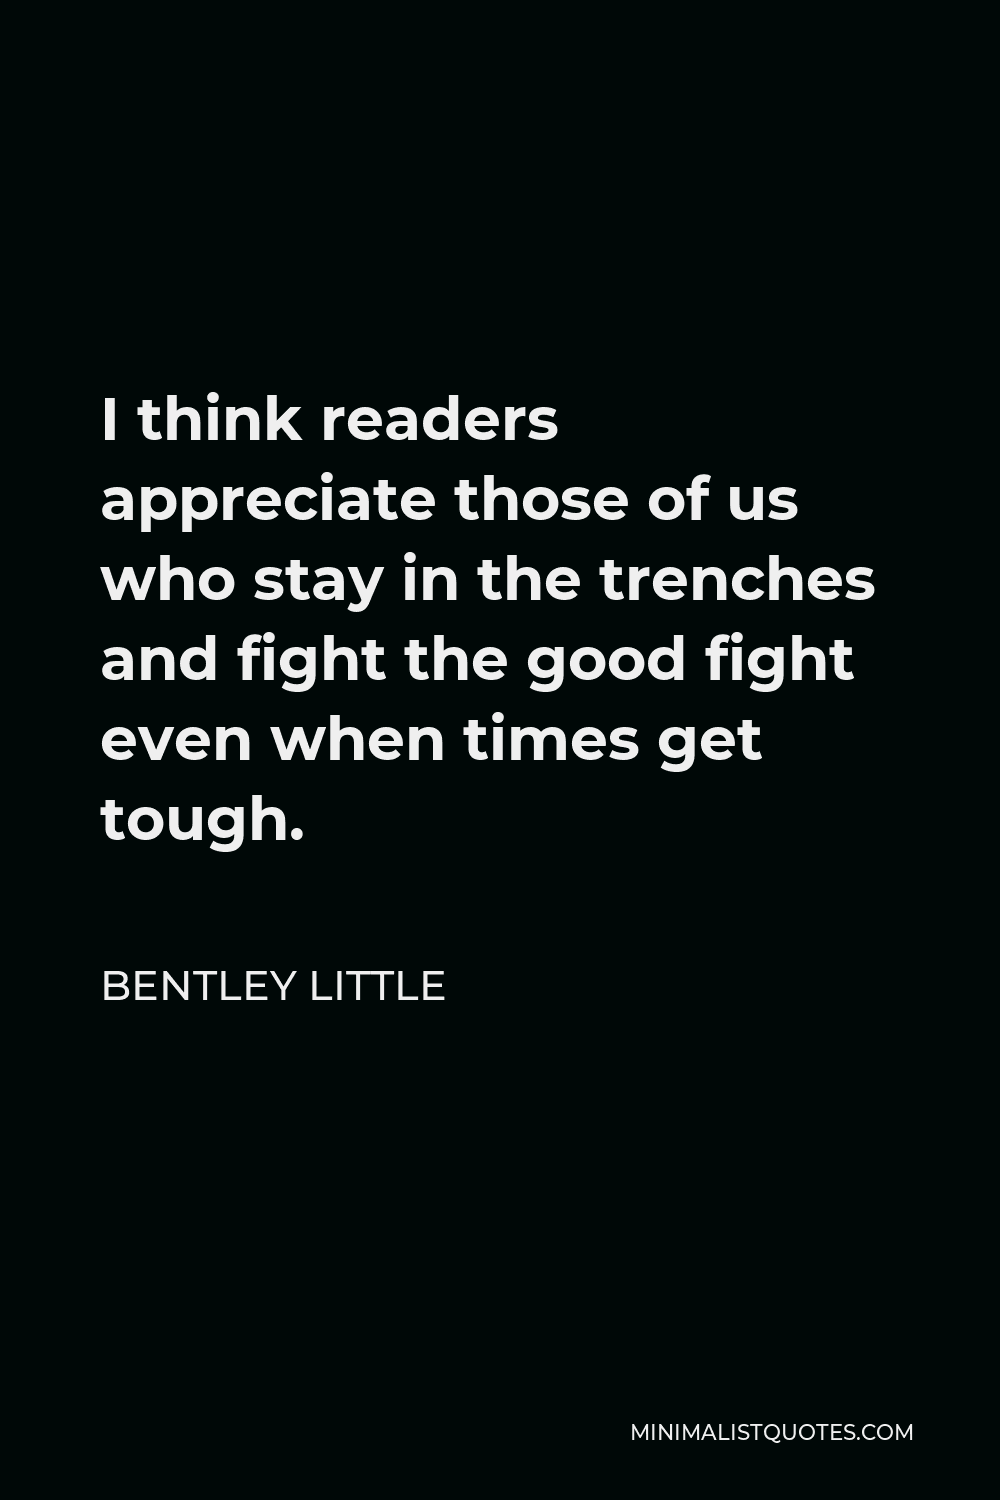 Bentley Little Quote - I think readers appreciate those of us who stay in the trenches and fight the good fight even when times get tough.